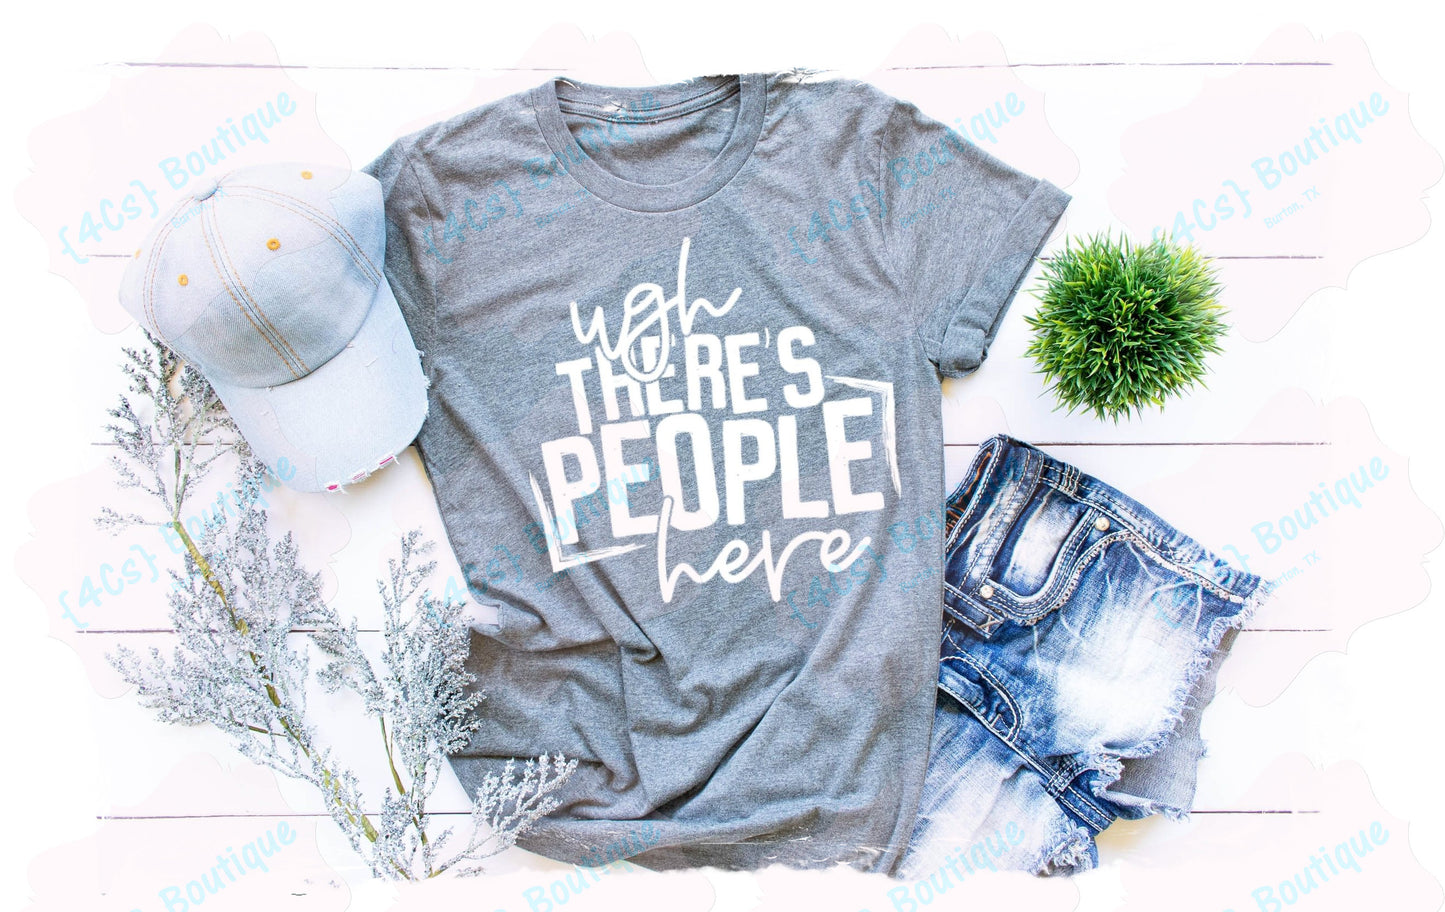 Ugh There's People Here Shirt